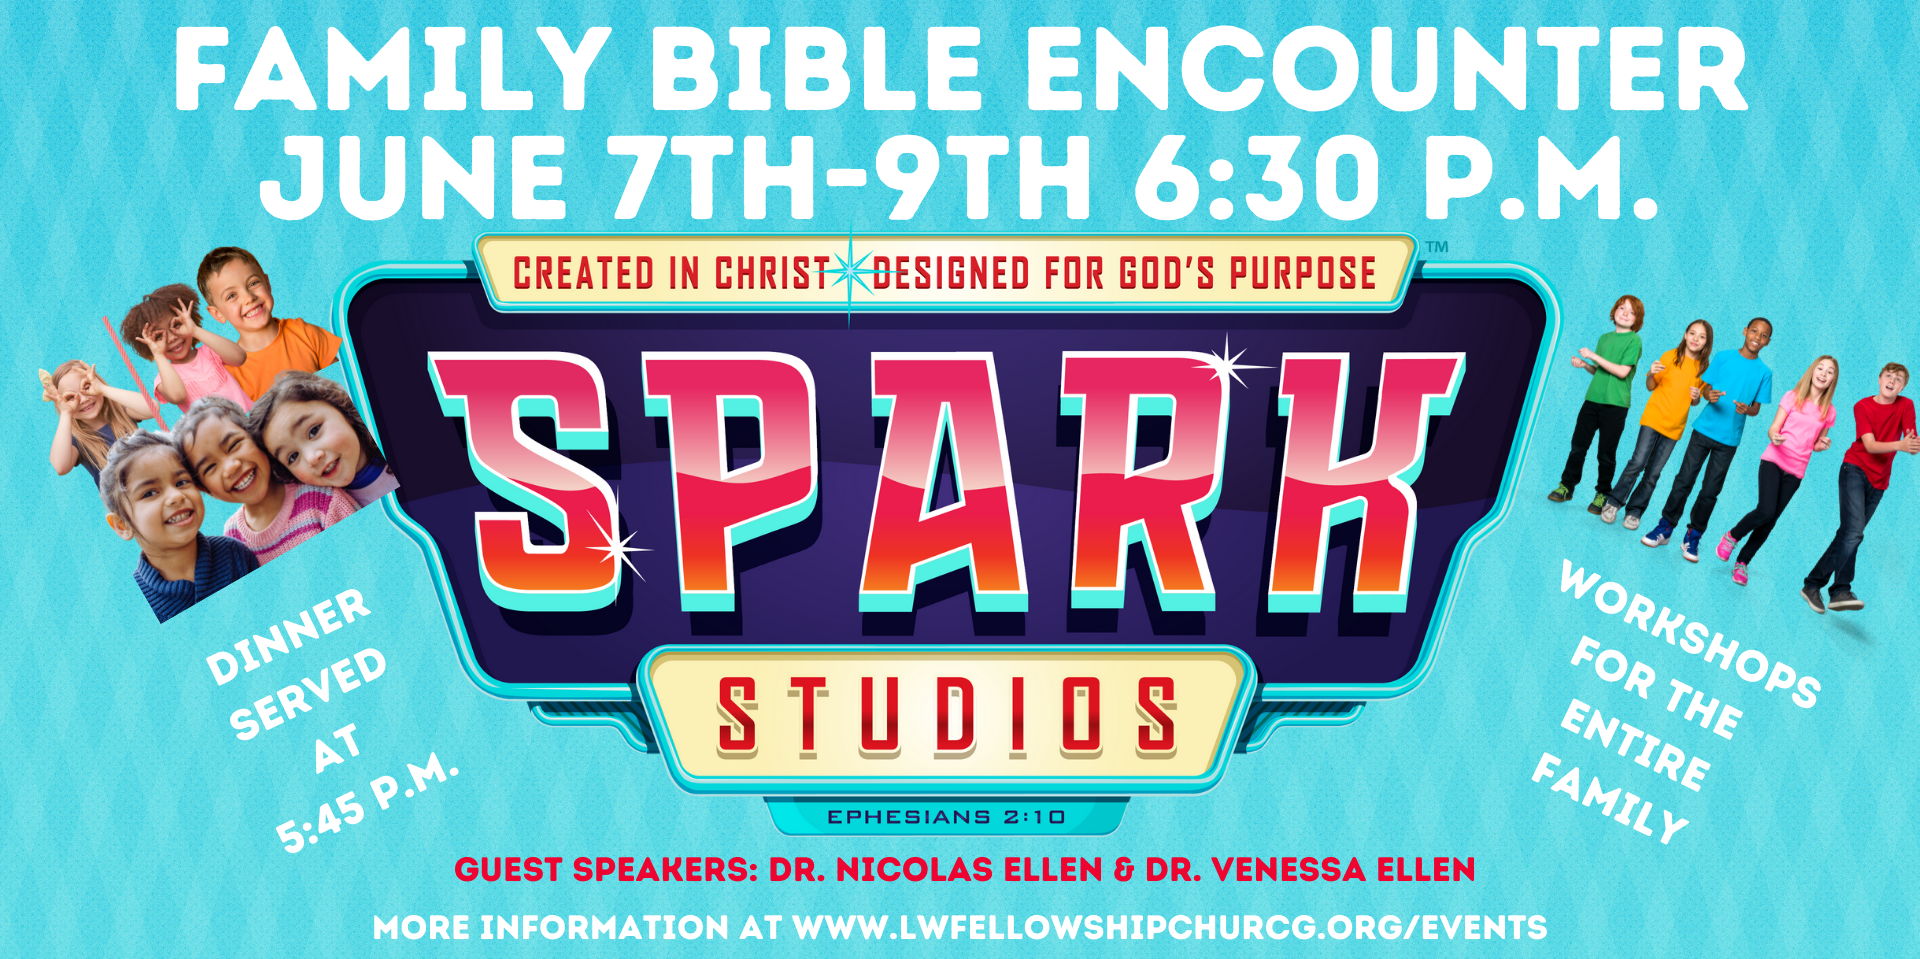 SPARK - Family Bible Encounter promotional image